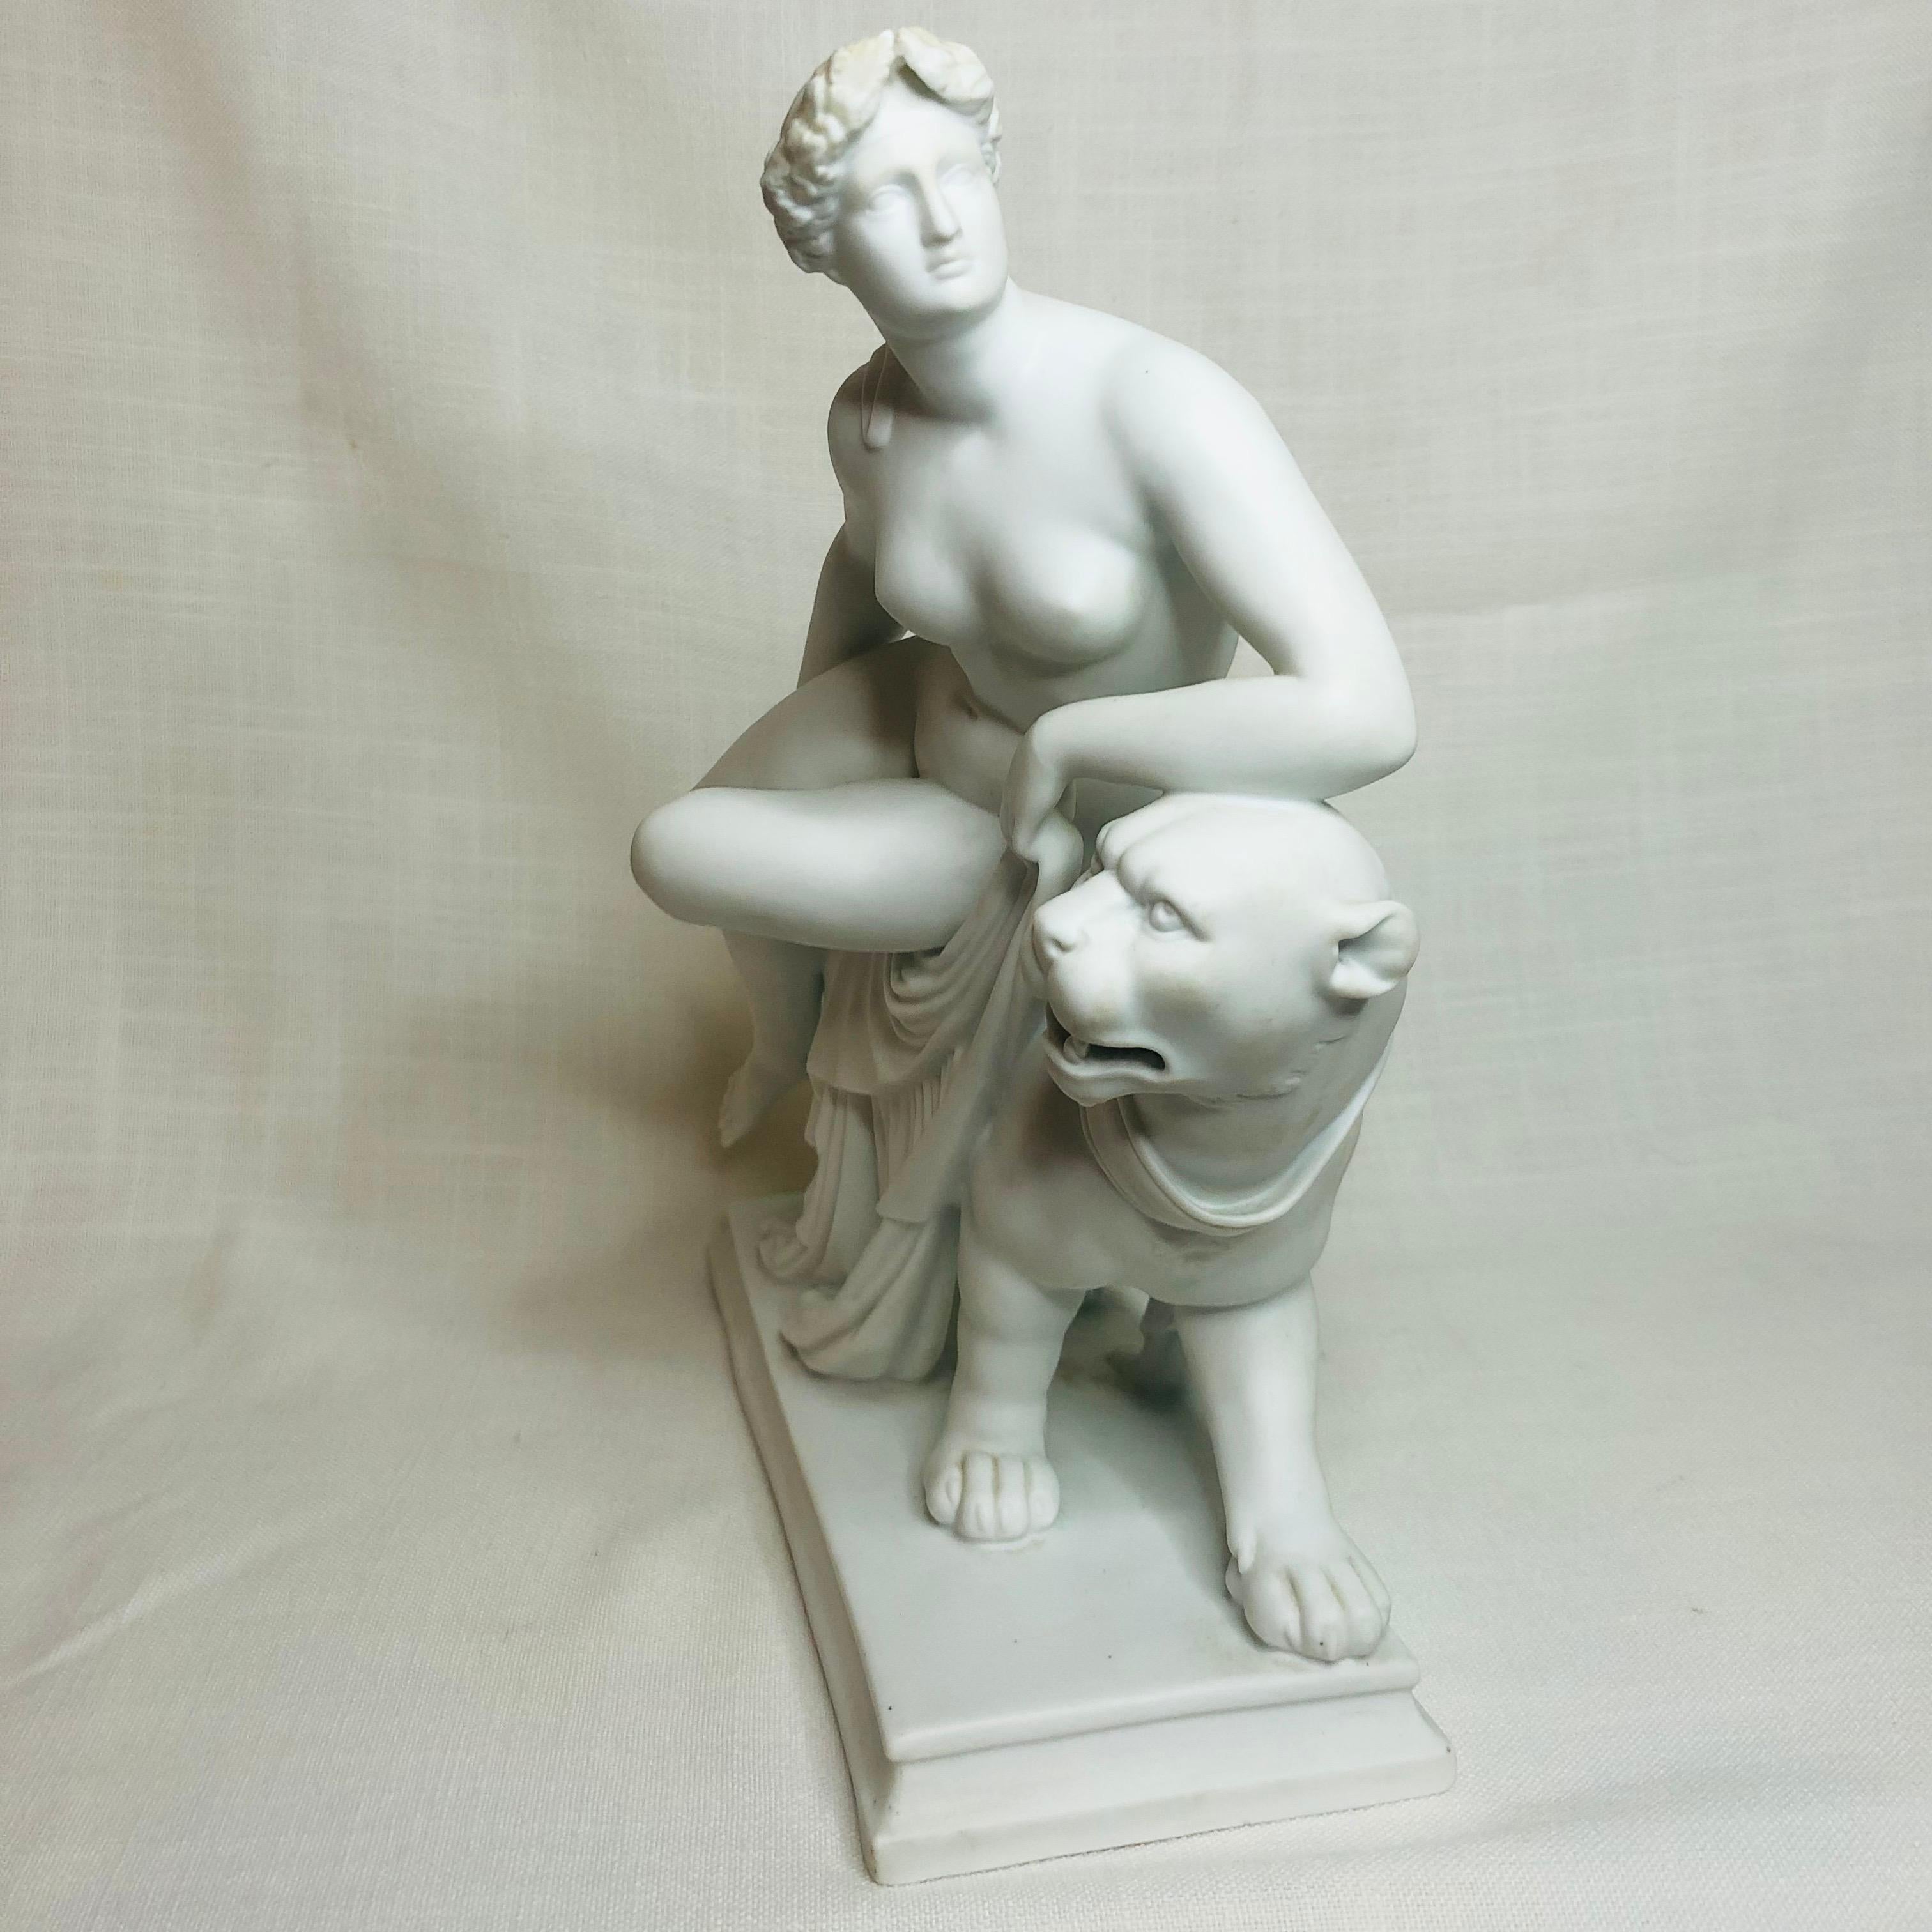 English Parian Figurine of a Nude Figure of Adriadne Riding on Top of a Panther 5